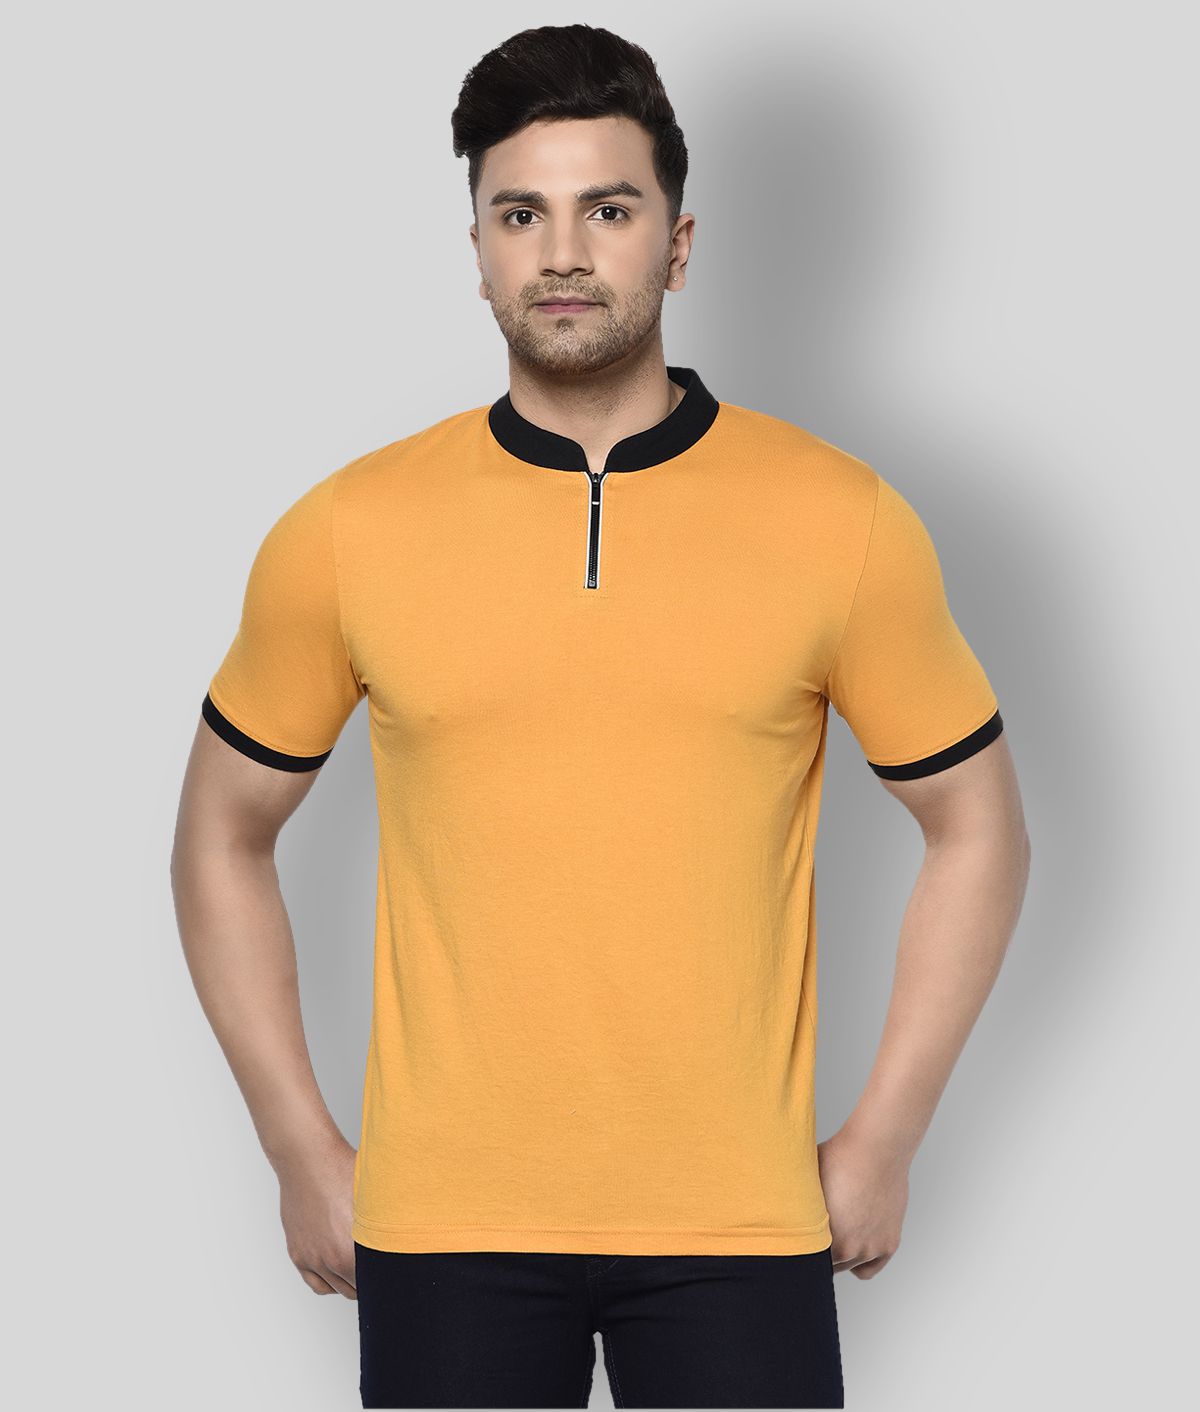     			Glito - Yellow Cotton Blend Slim Fit Men's T-Shirt ( Pack of 1 )